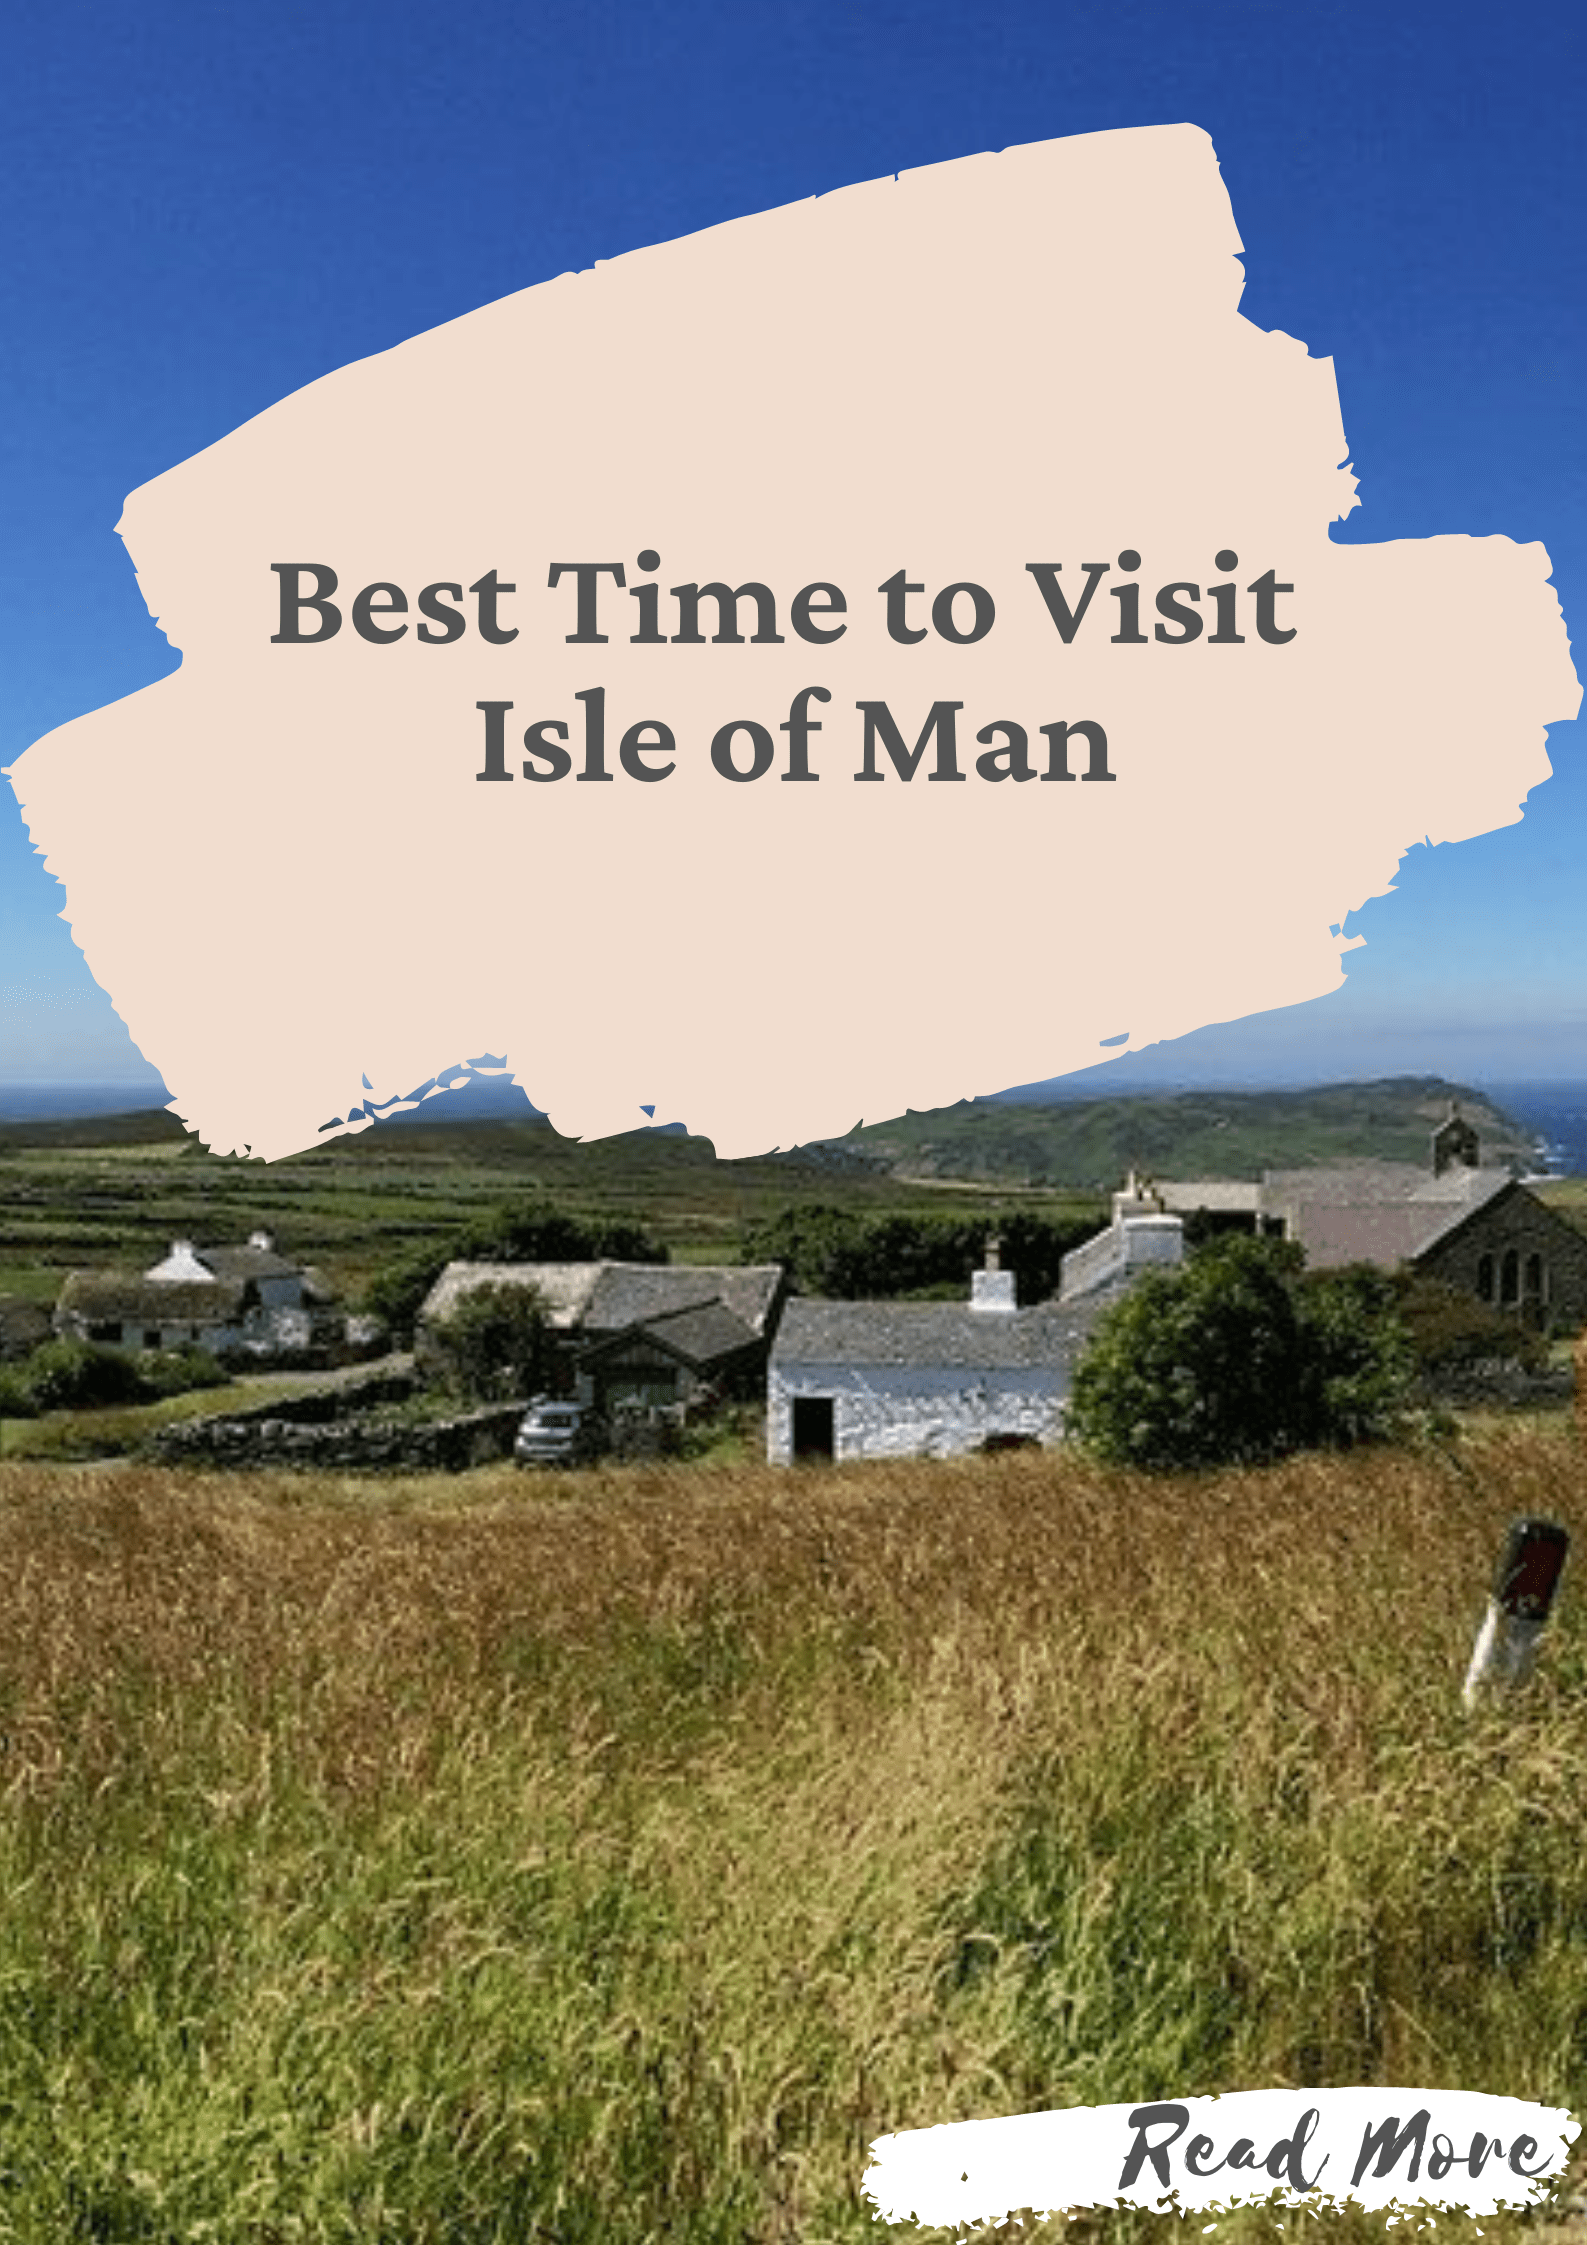 Best Time to Visit Isle of Man